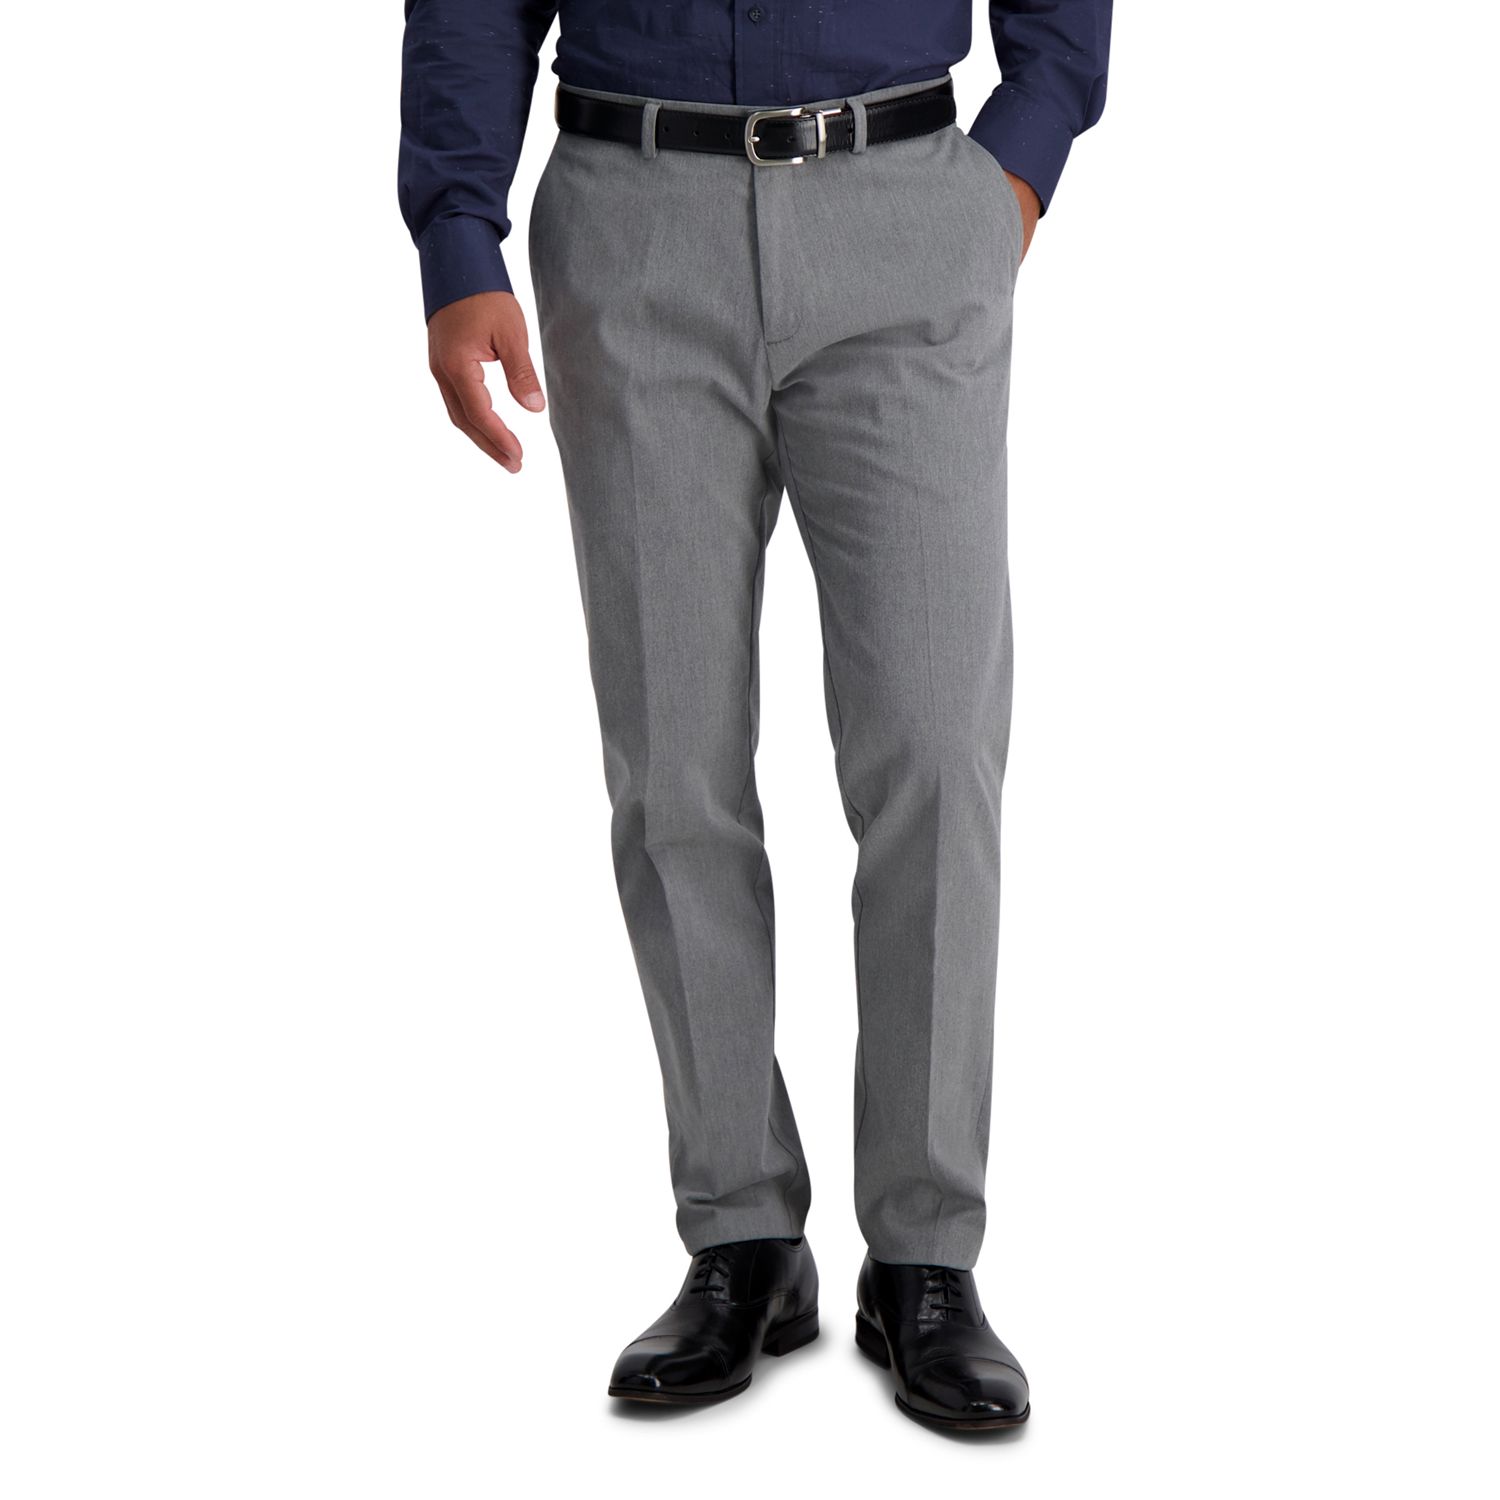 slim fit casual trousers